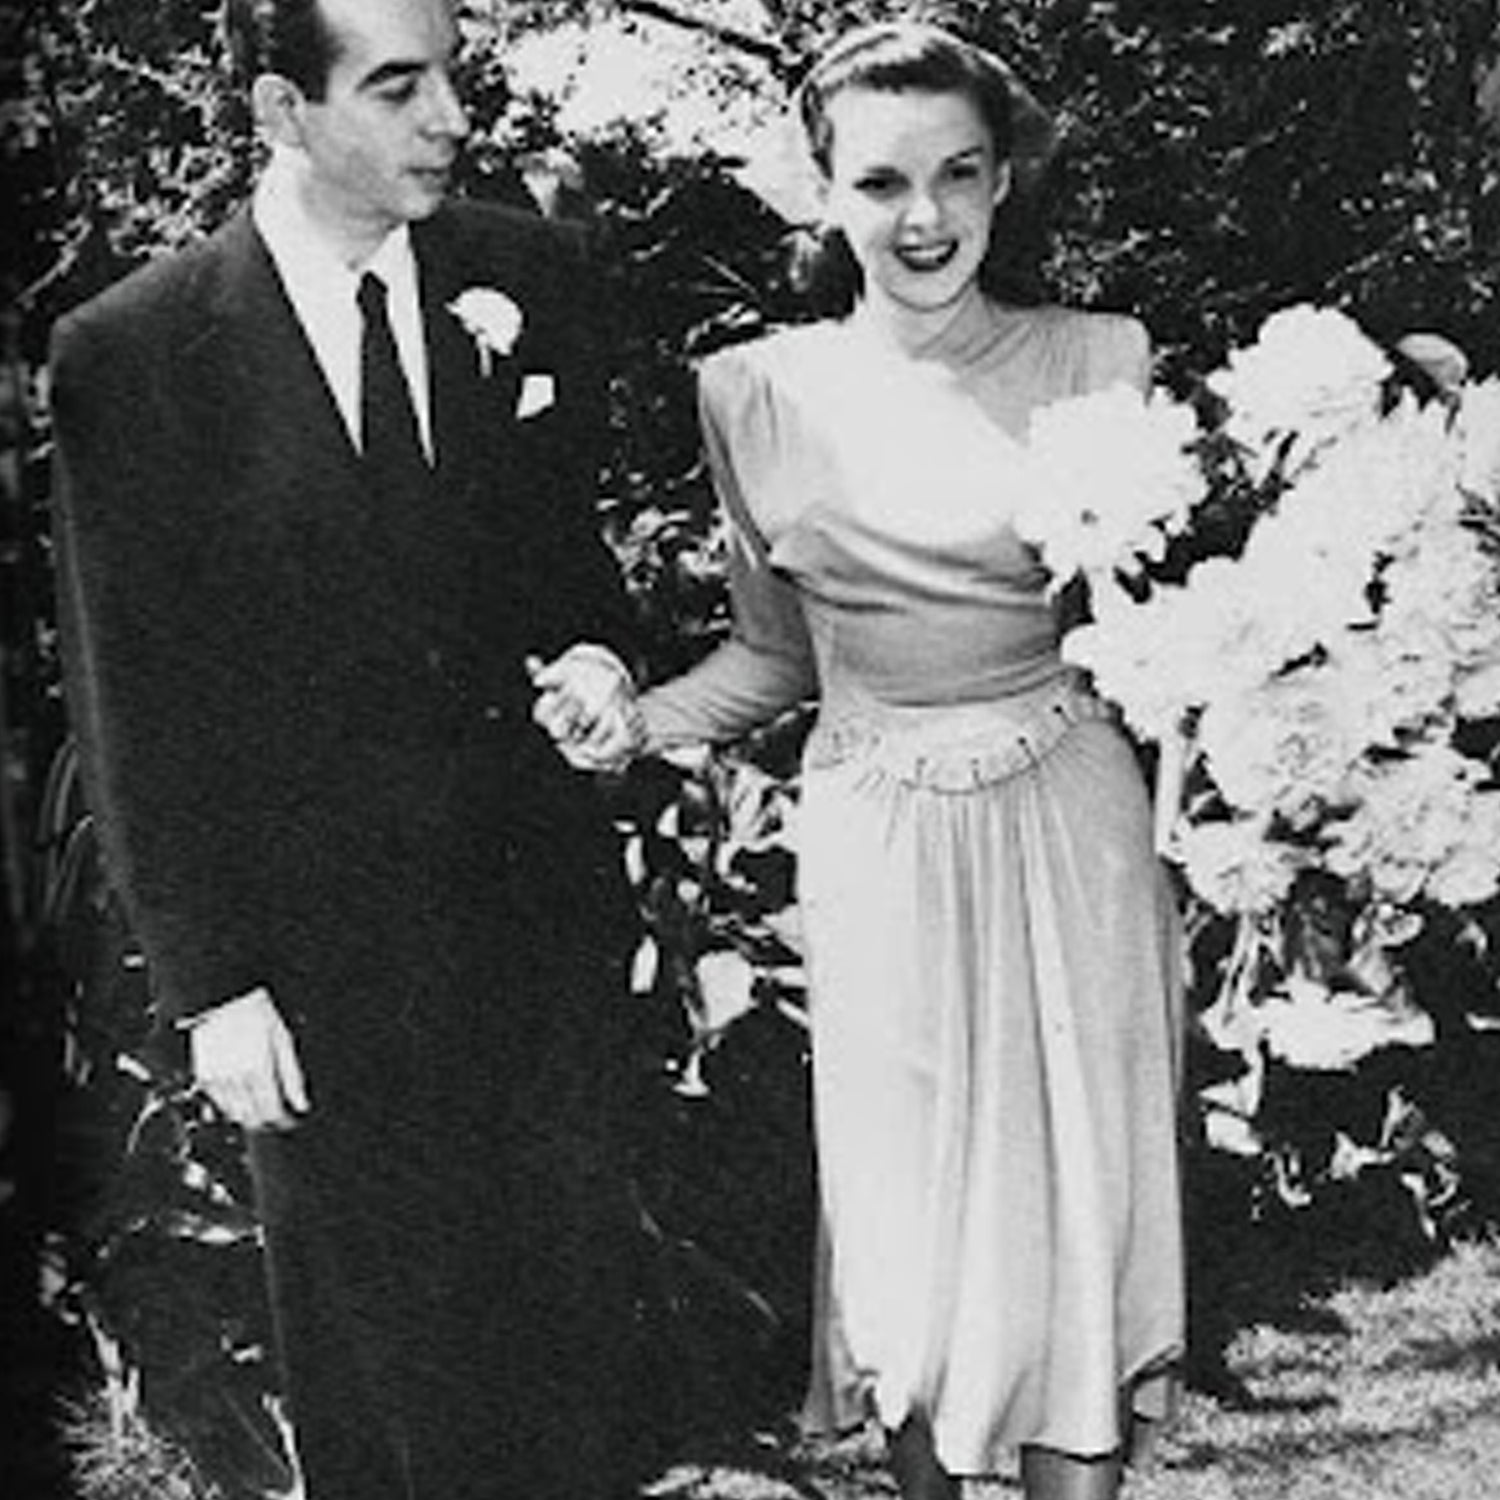 Julie Garland and Vincent Minnelli on their wedding day